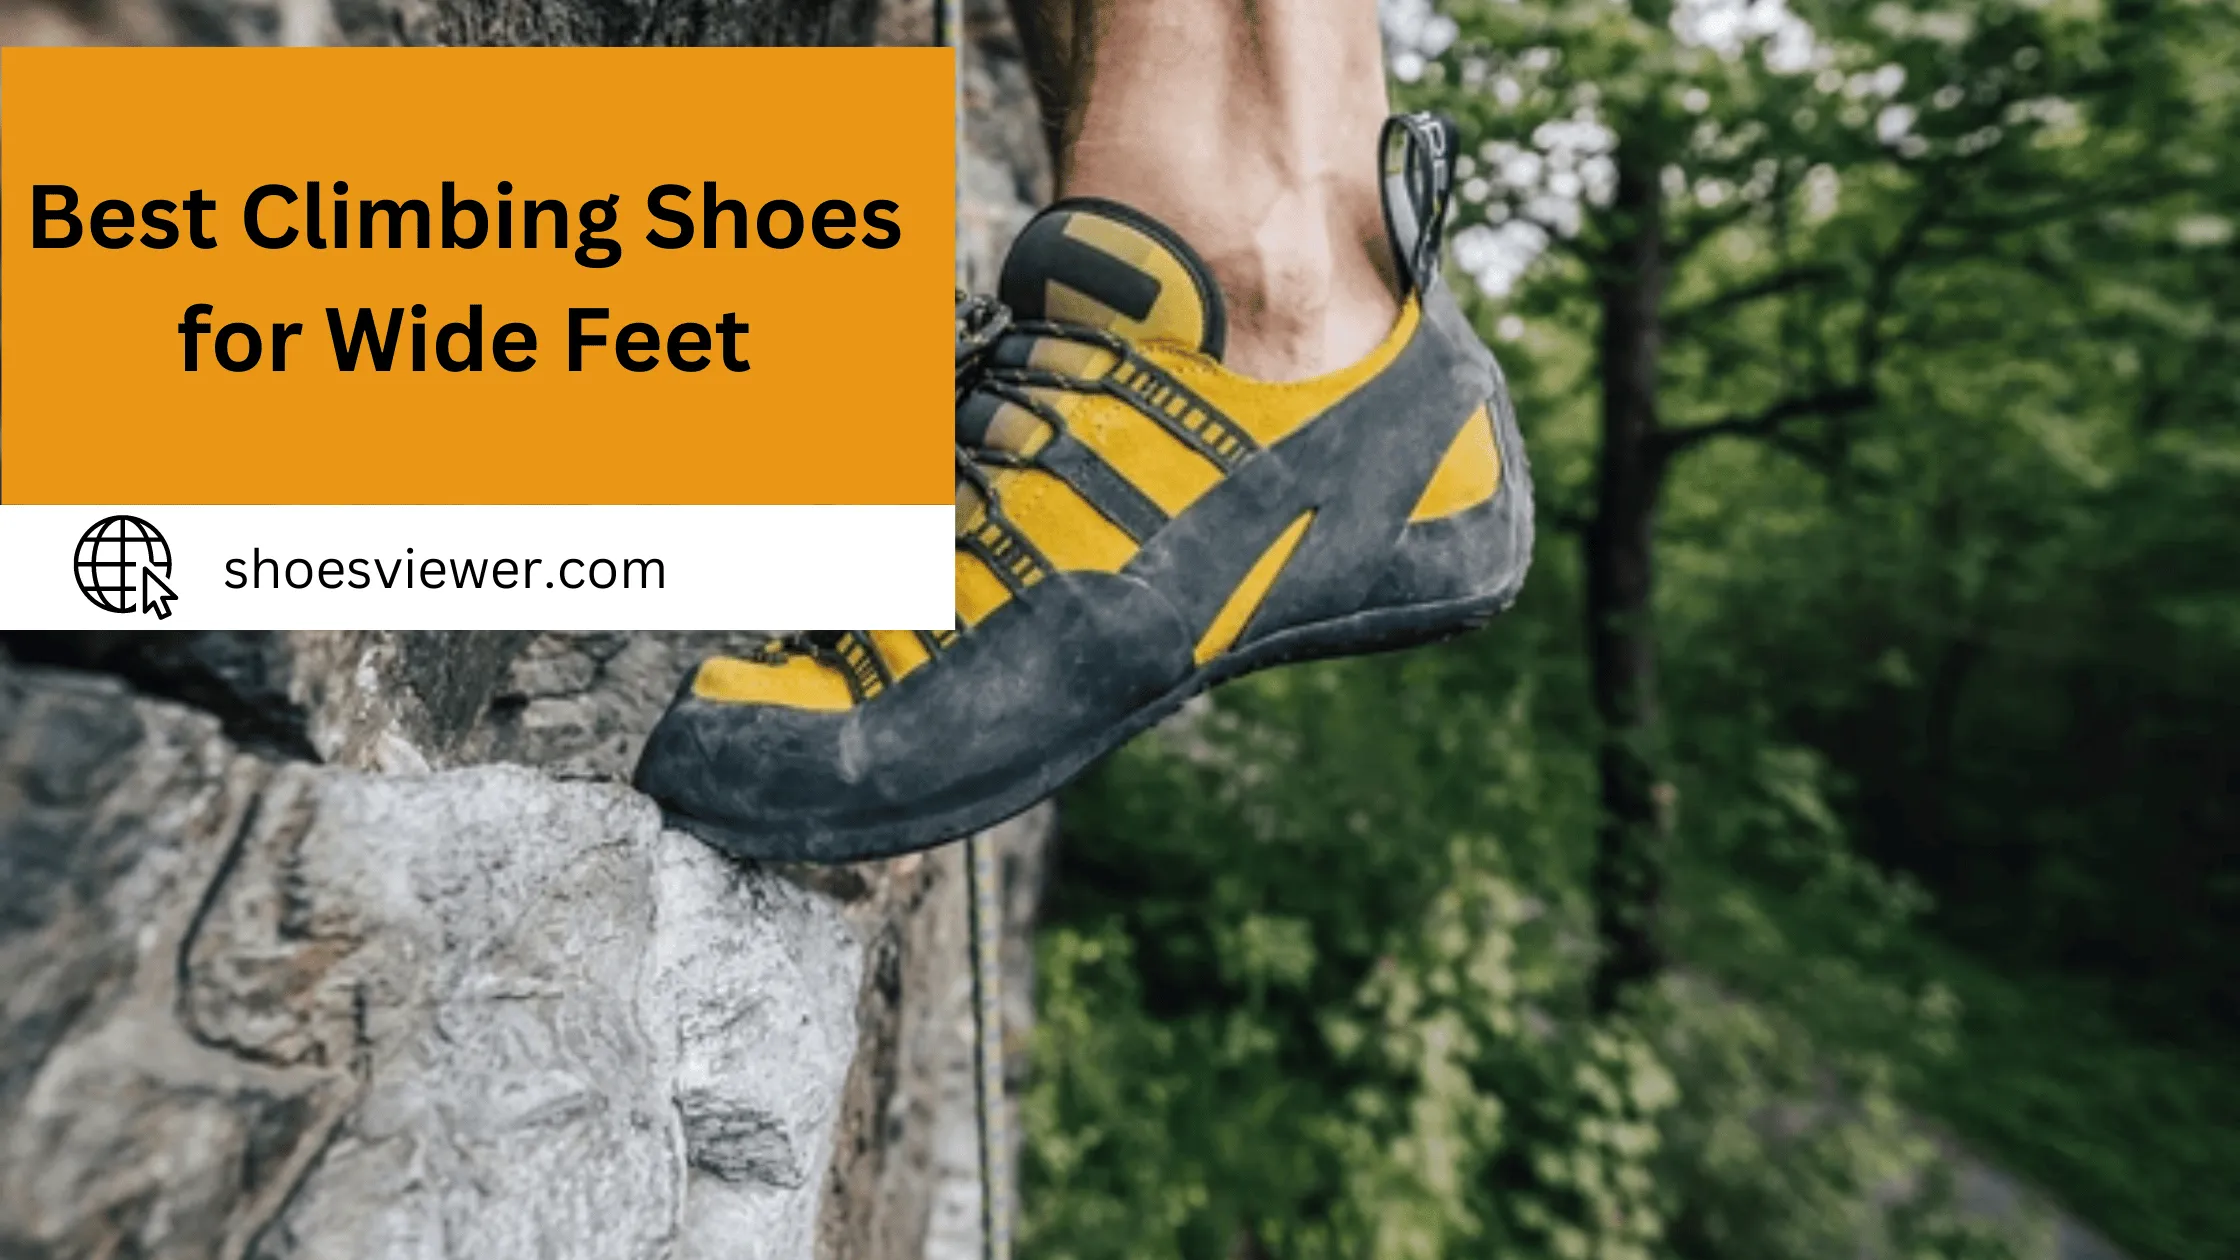 Best Climbing Shoes For Wide Feet - Latest Guide